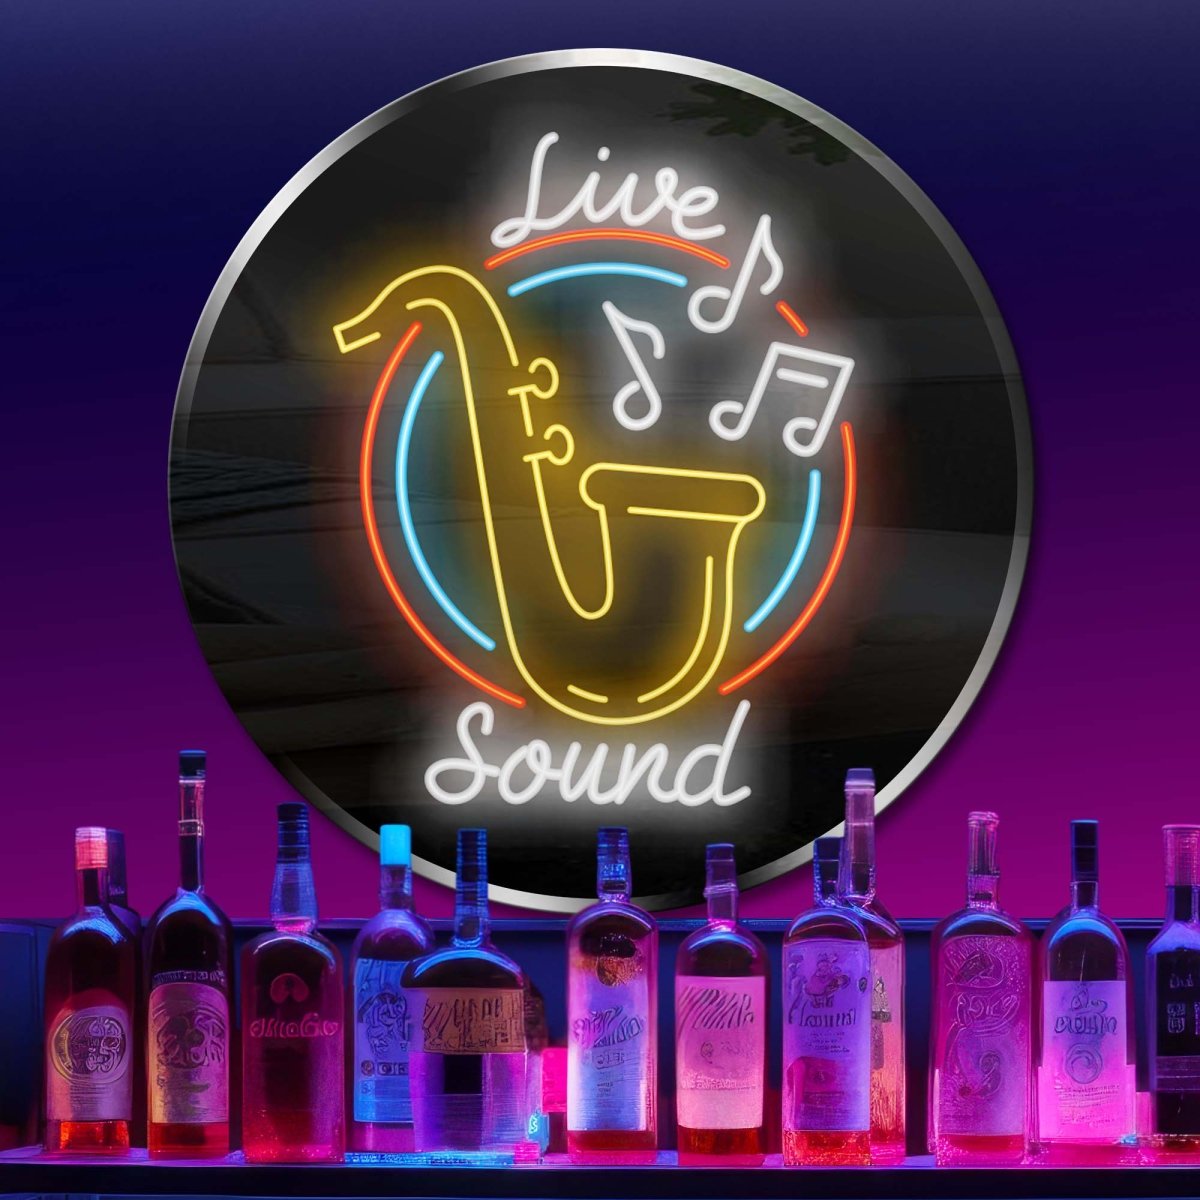 Personalized Neon Sign Live Sound Saxophone - madaboutneon